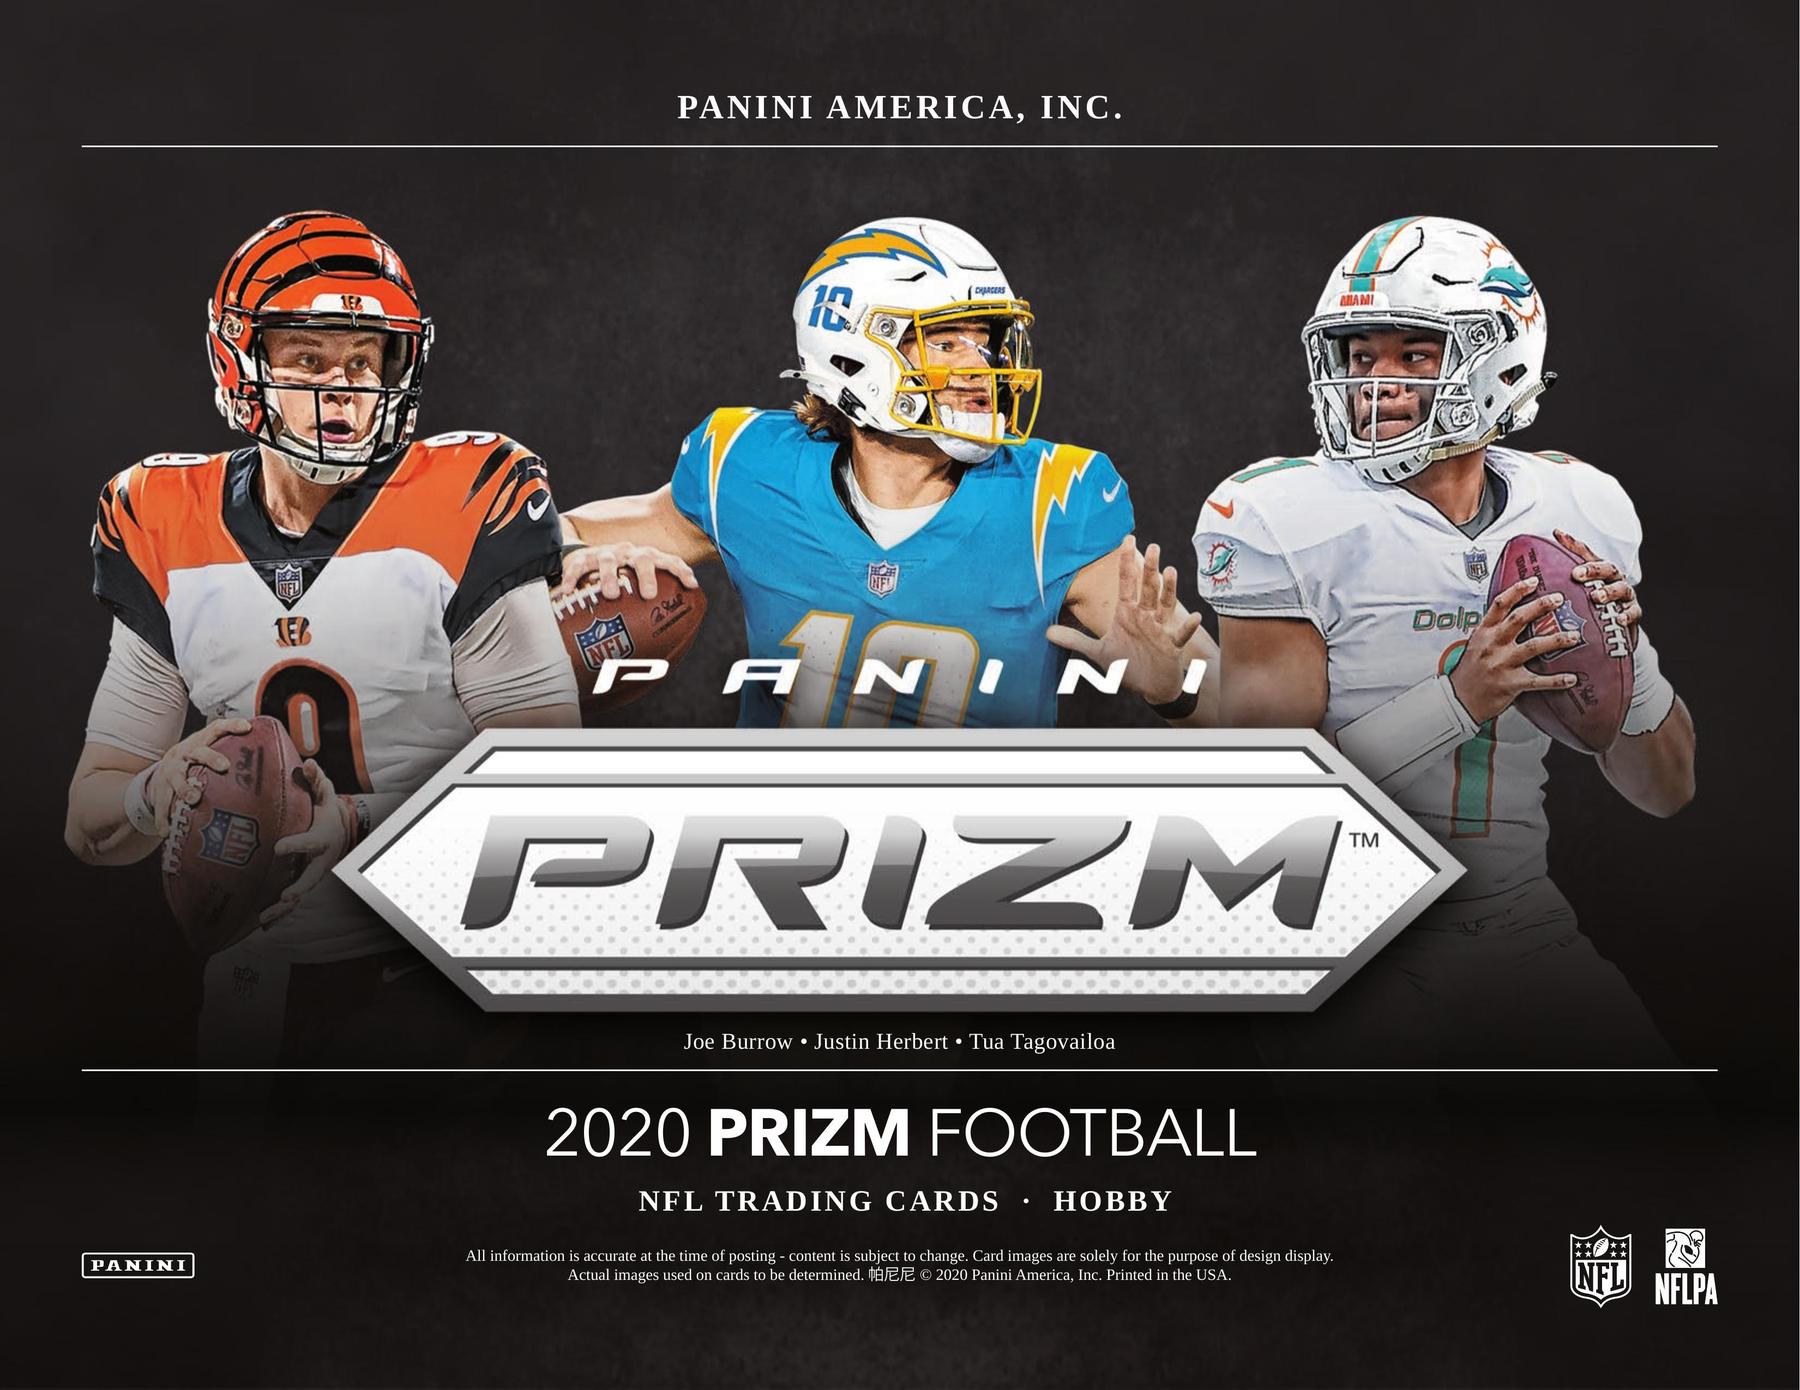 assets.dacw.co/itemimages/2020-prizm-football-n...